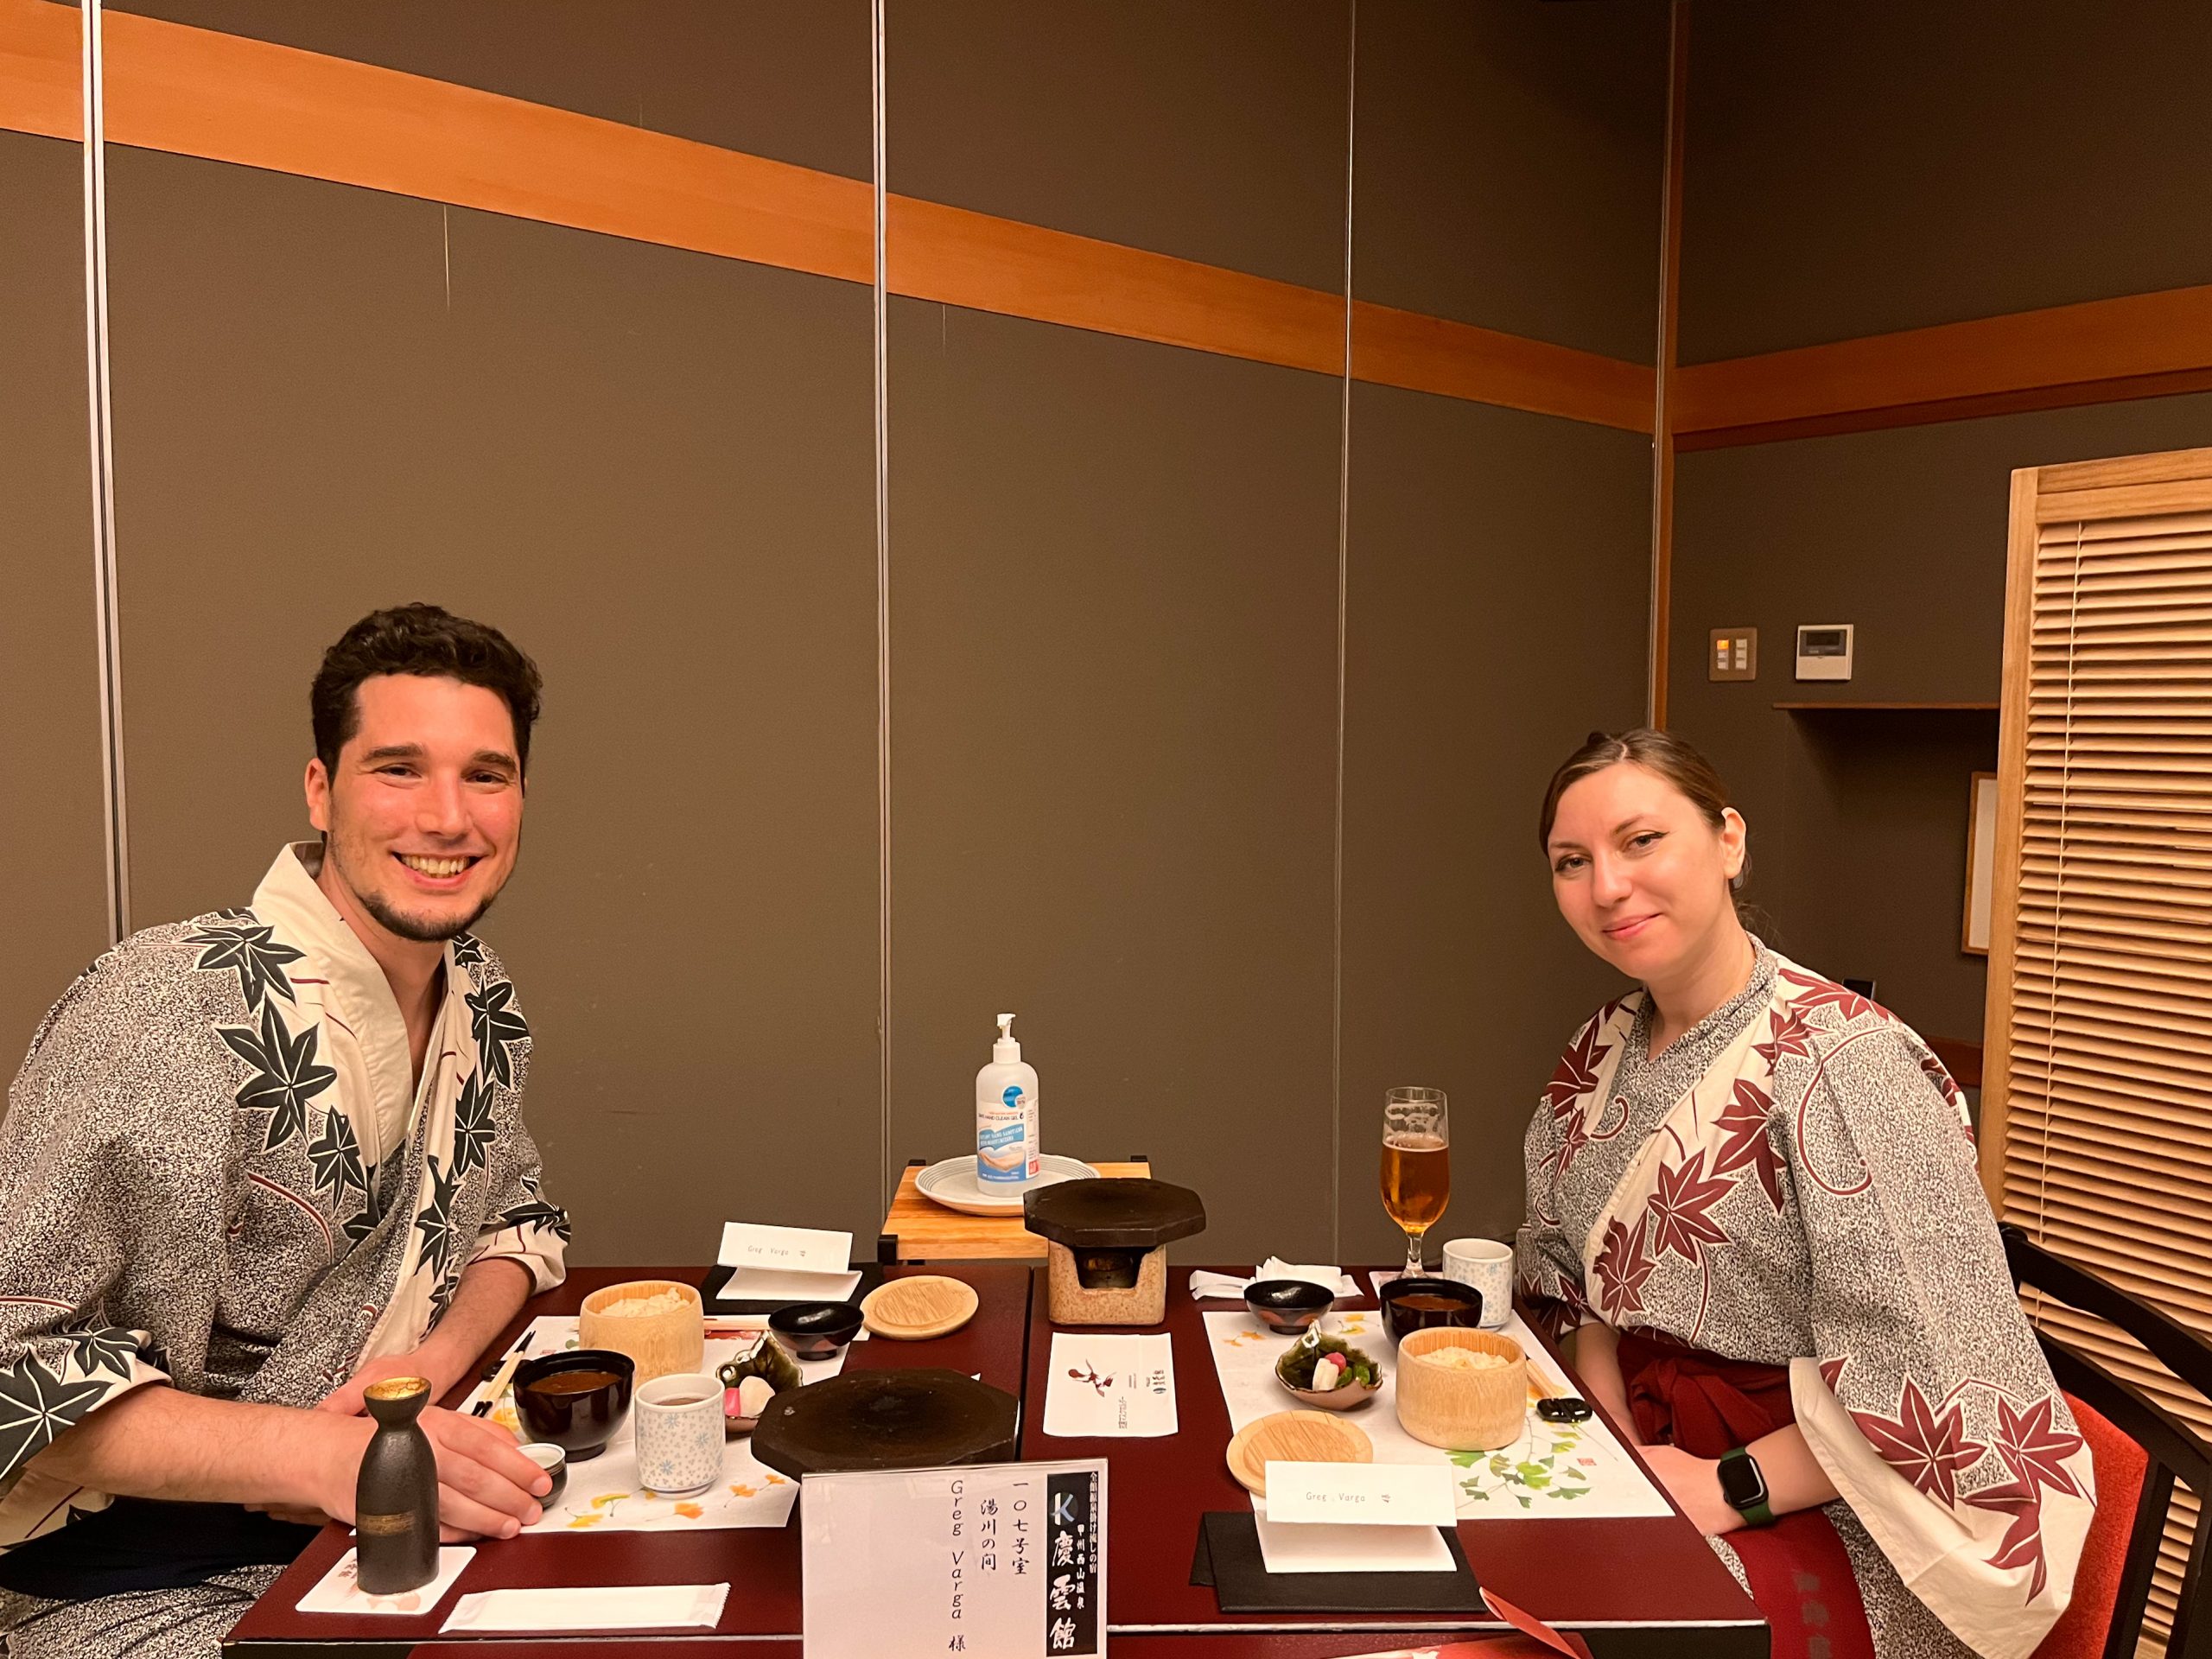 Cory and G from You Could Travel during dinner at Nishiyama onsen